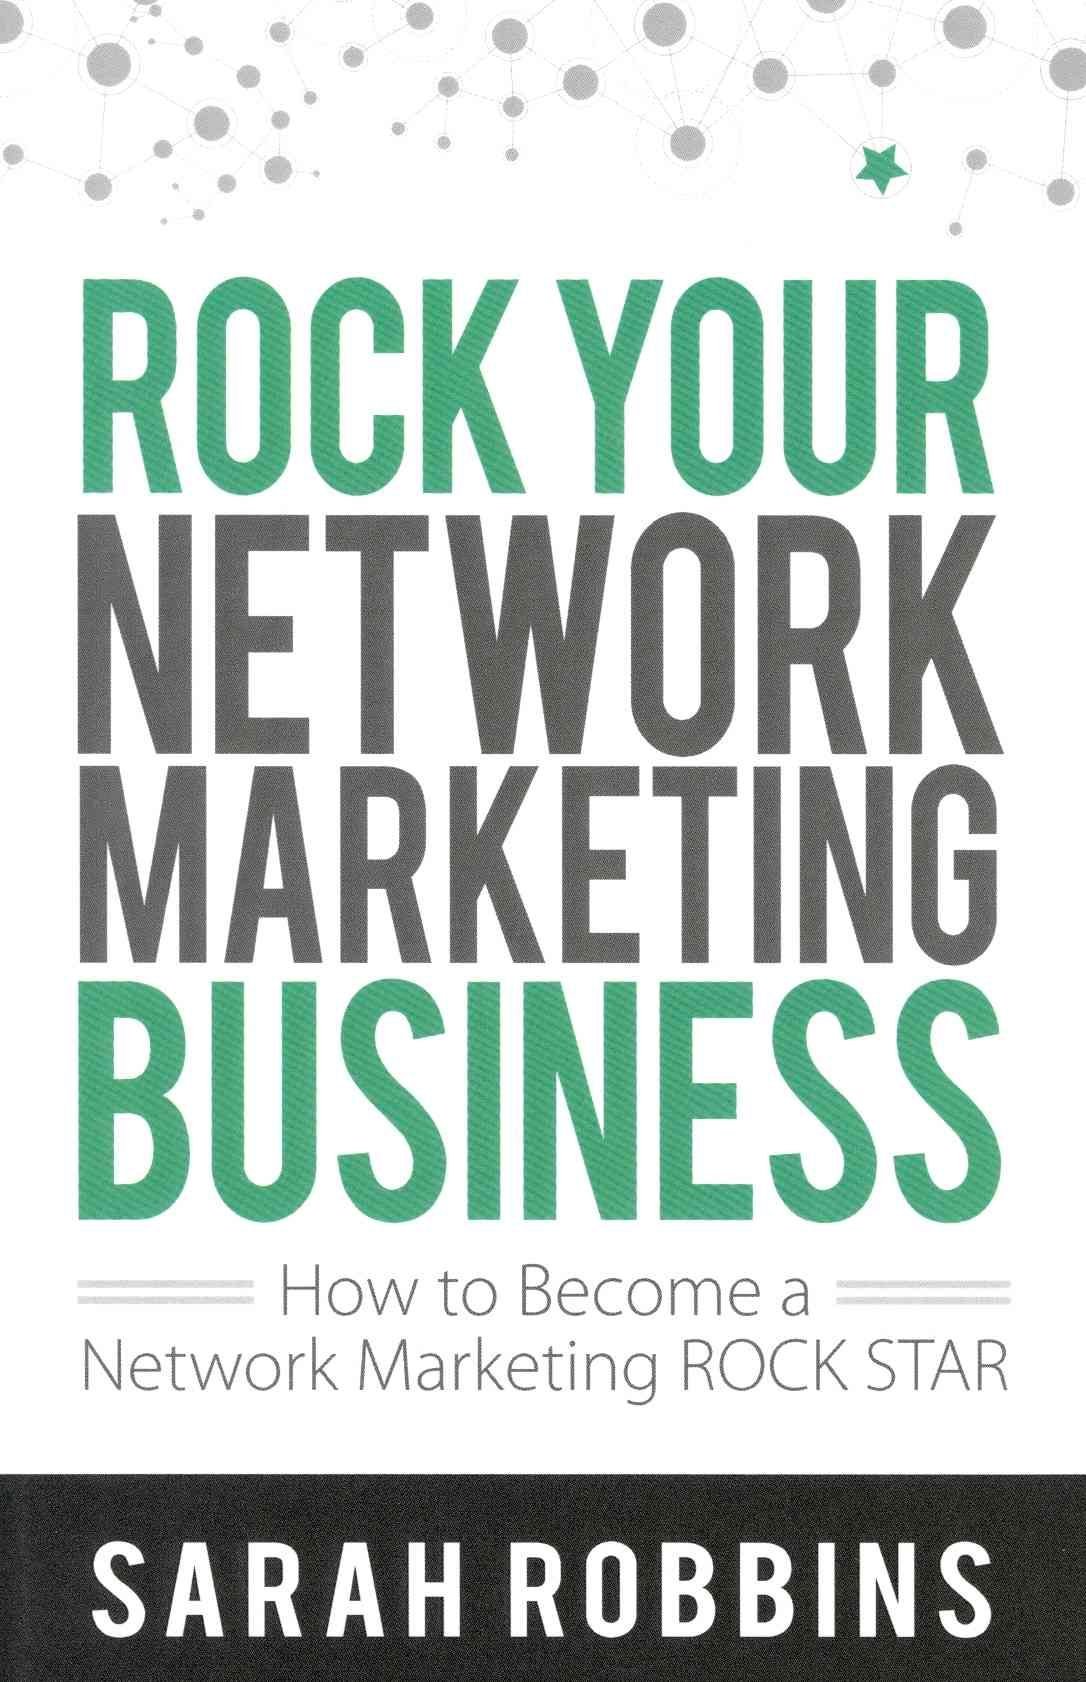 Rock Your Network Marketing Business